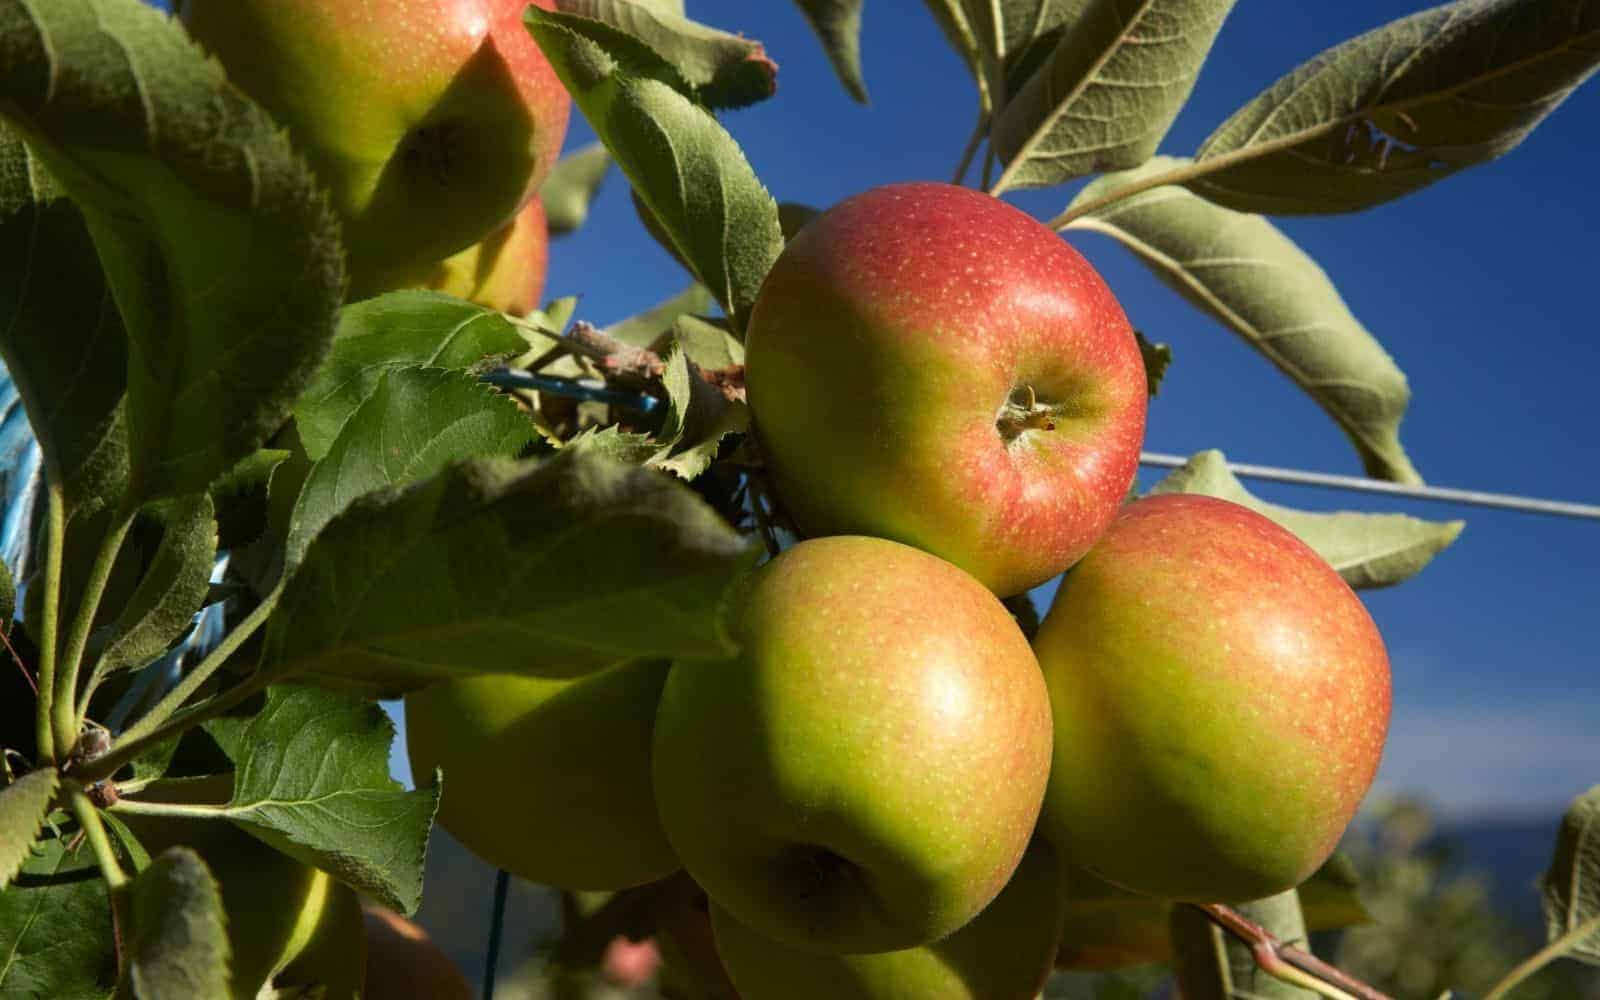 Jonagold apples growing on the tree